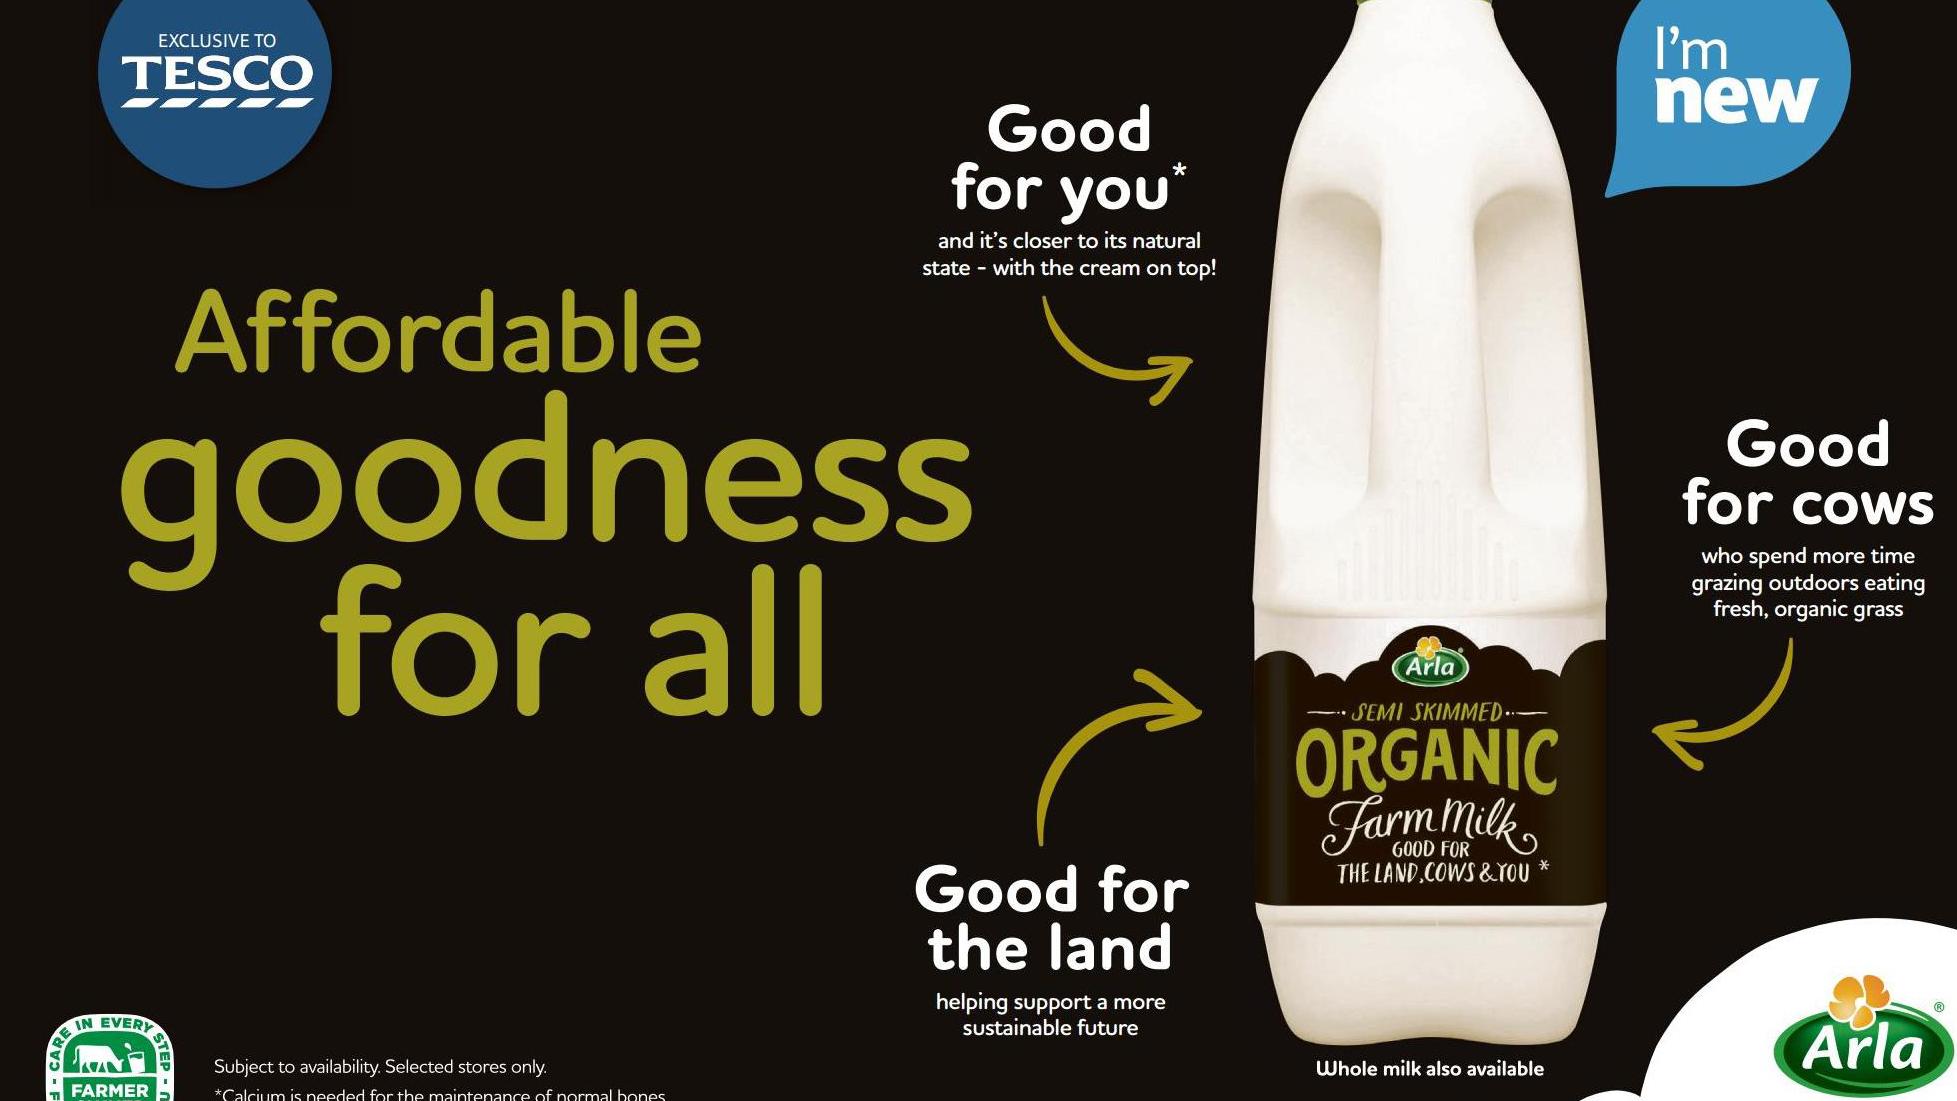 The ad claimed the milk was 'helping support a more sustainable future' but the regulator said it was misleading